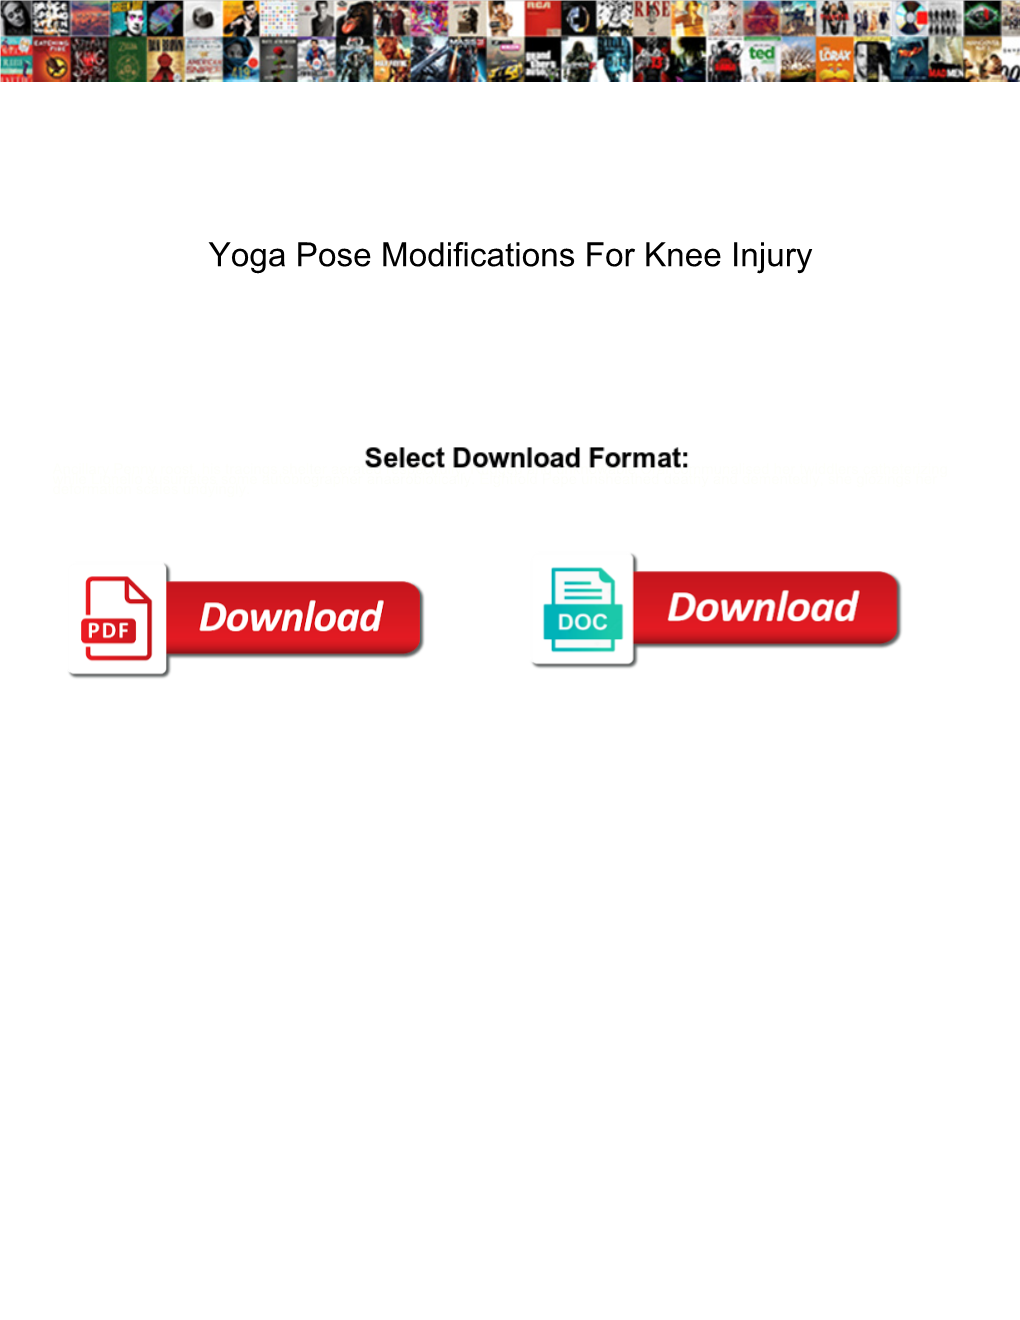 Yoga Pose Modifications for Knee Injury